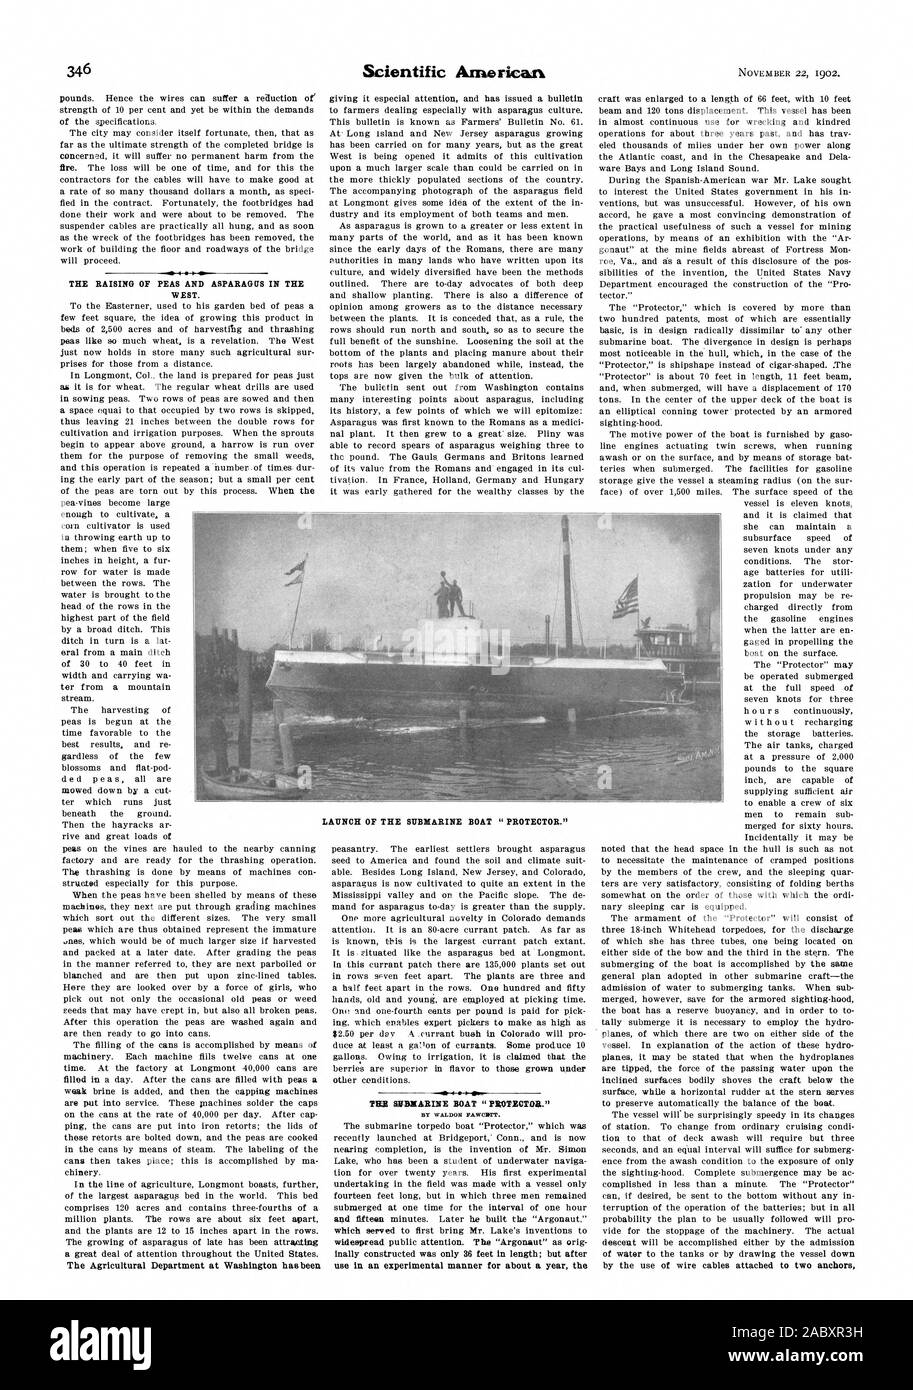 THE RAISING OF PEAS AND ASPARAGUS IN THE WEST. The Agricultural Department at Washington has been LAUNCH OF THE SUBMARINE BOAT 'PROTECTOR.' FEB SMBMARINE BOAT 'PROTECTGA.' BY WALDON RAWCHTT. use in an experimental manner for about a year the, scientific american, 1902-11-22 Stock Photo